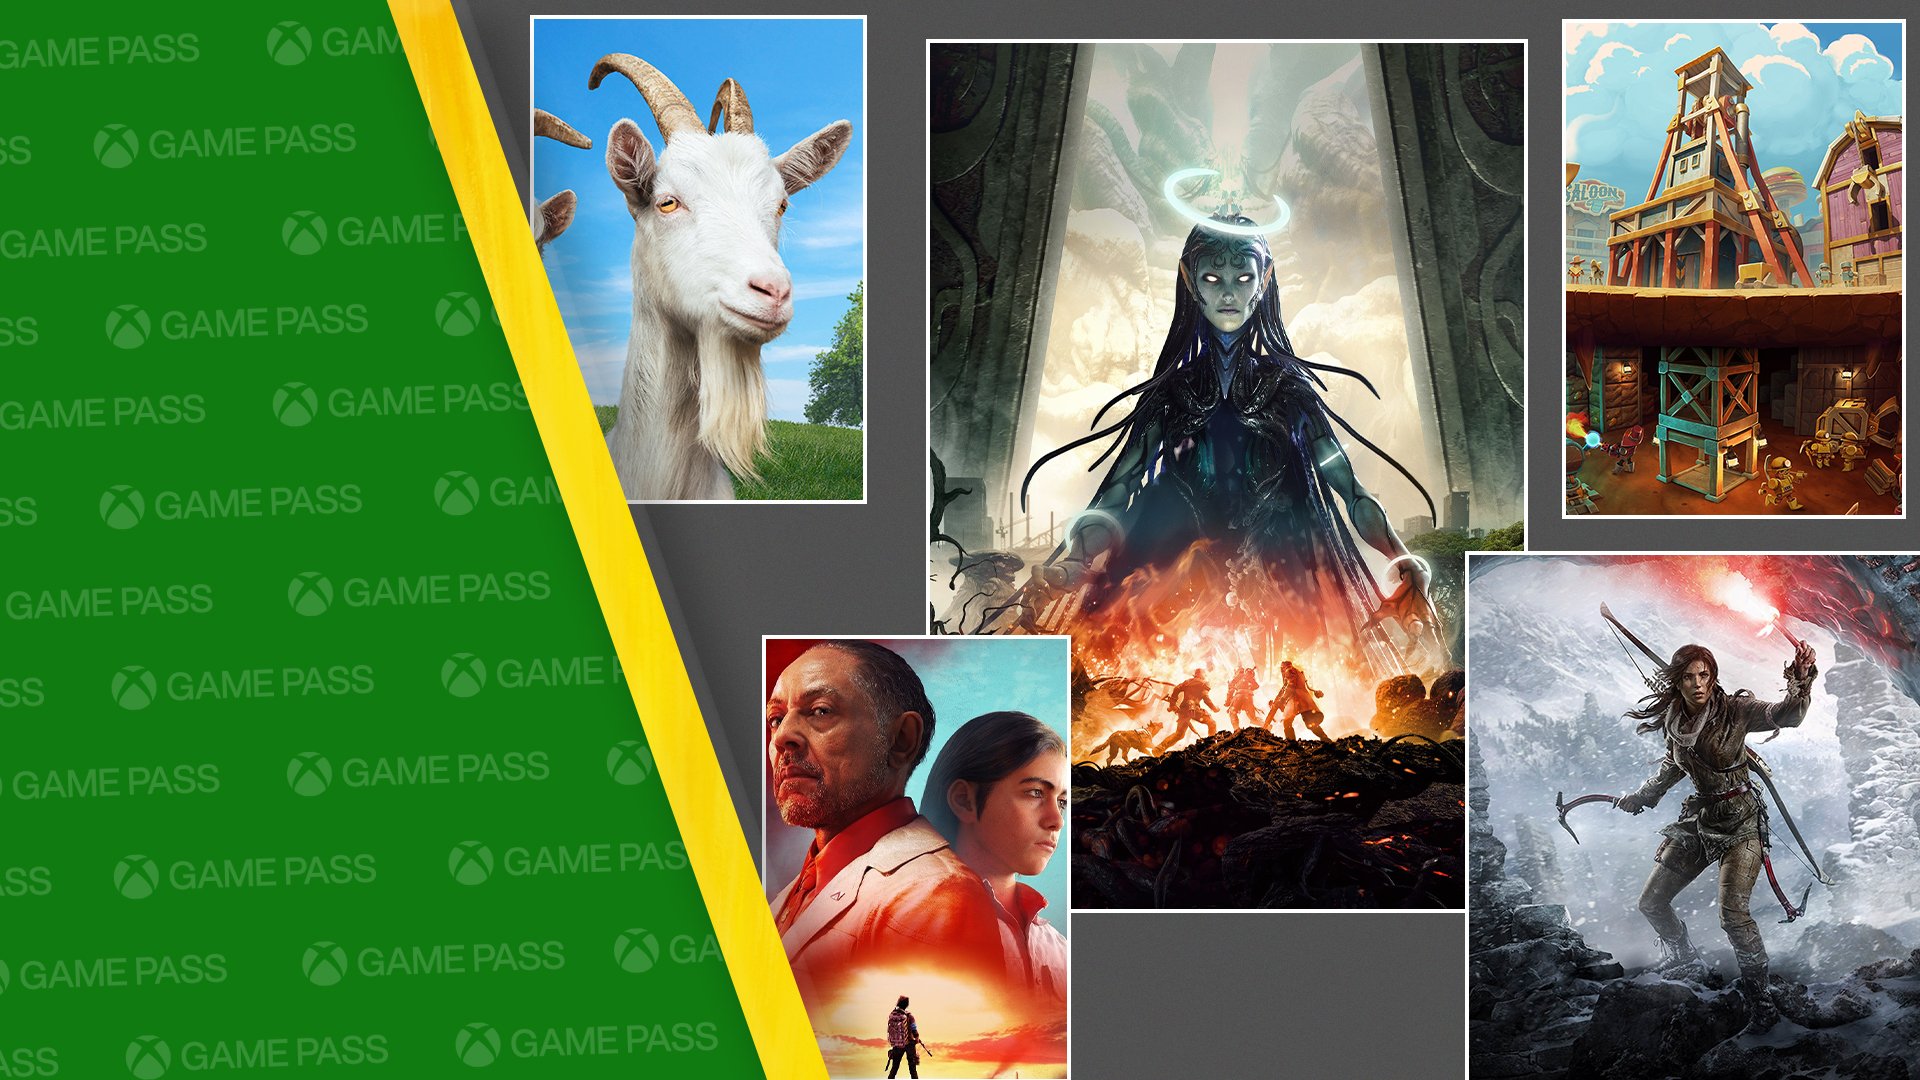 Coming Soon to Game Pass: Far Cry 6, Remnant II, SteamWorld Build, and More  - Xbox Wire